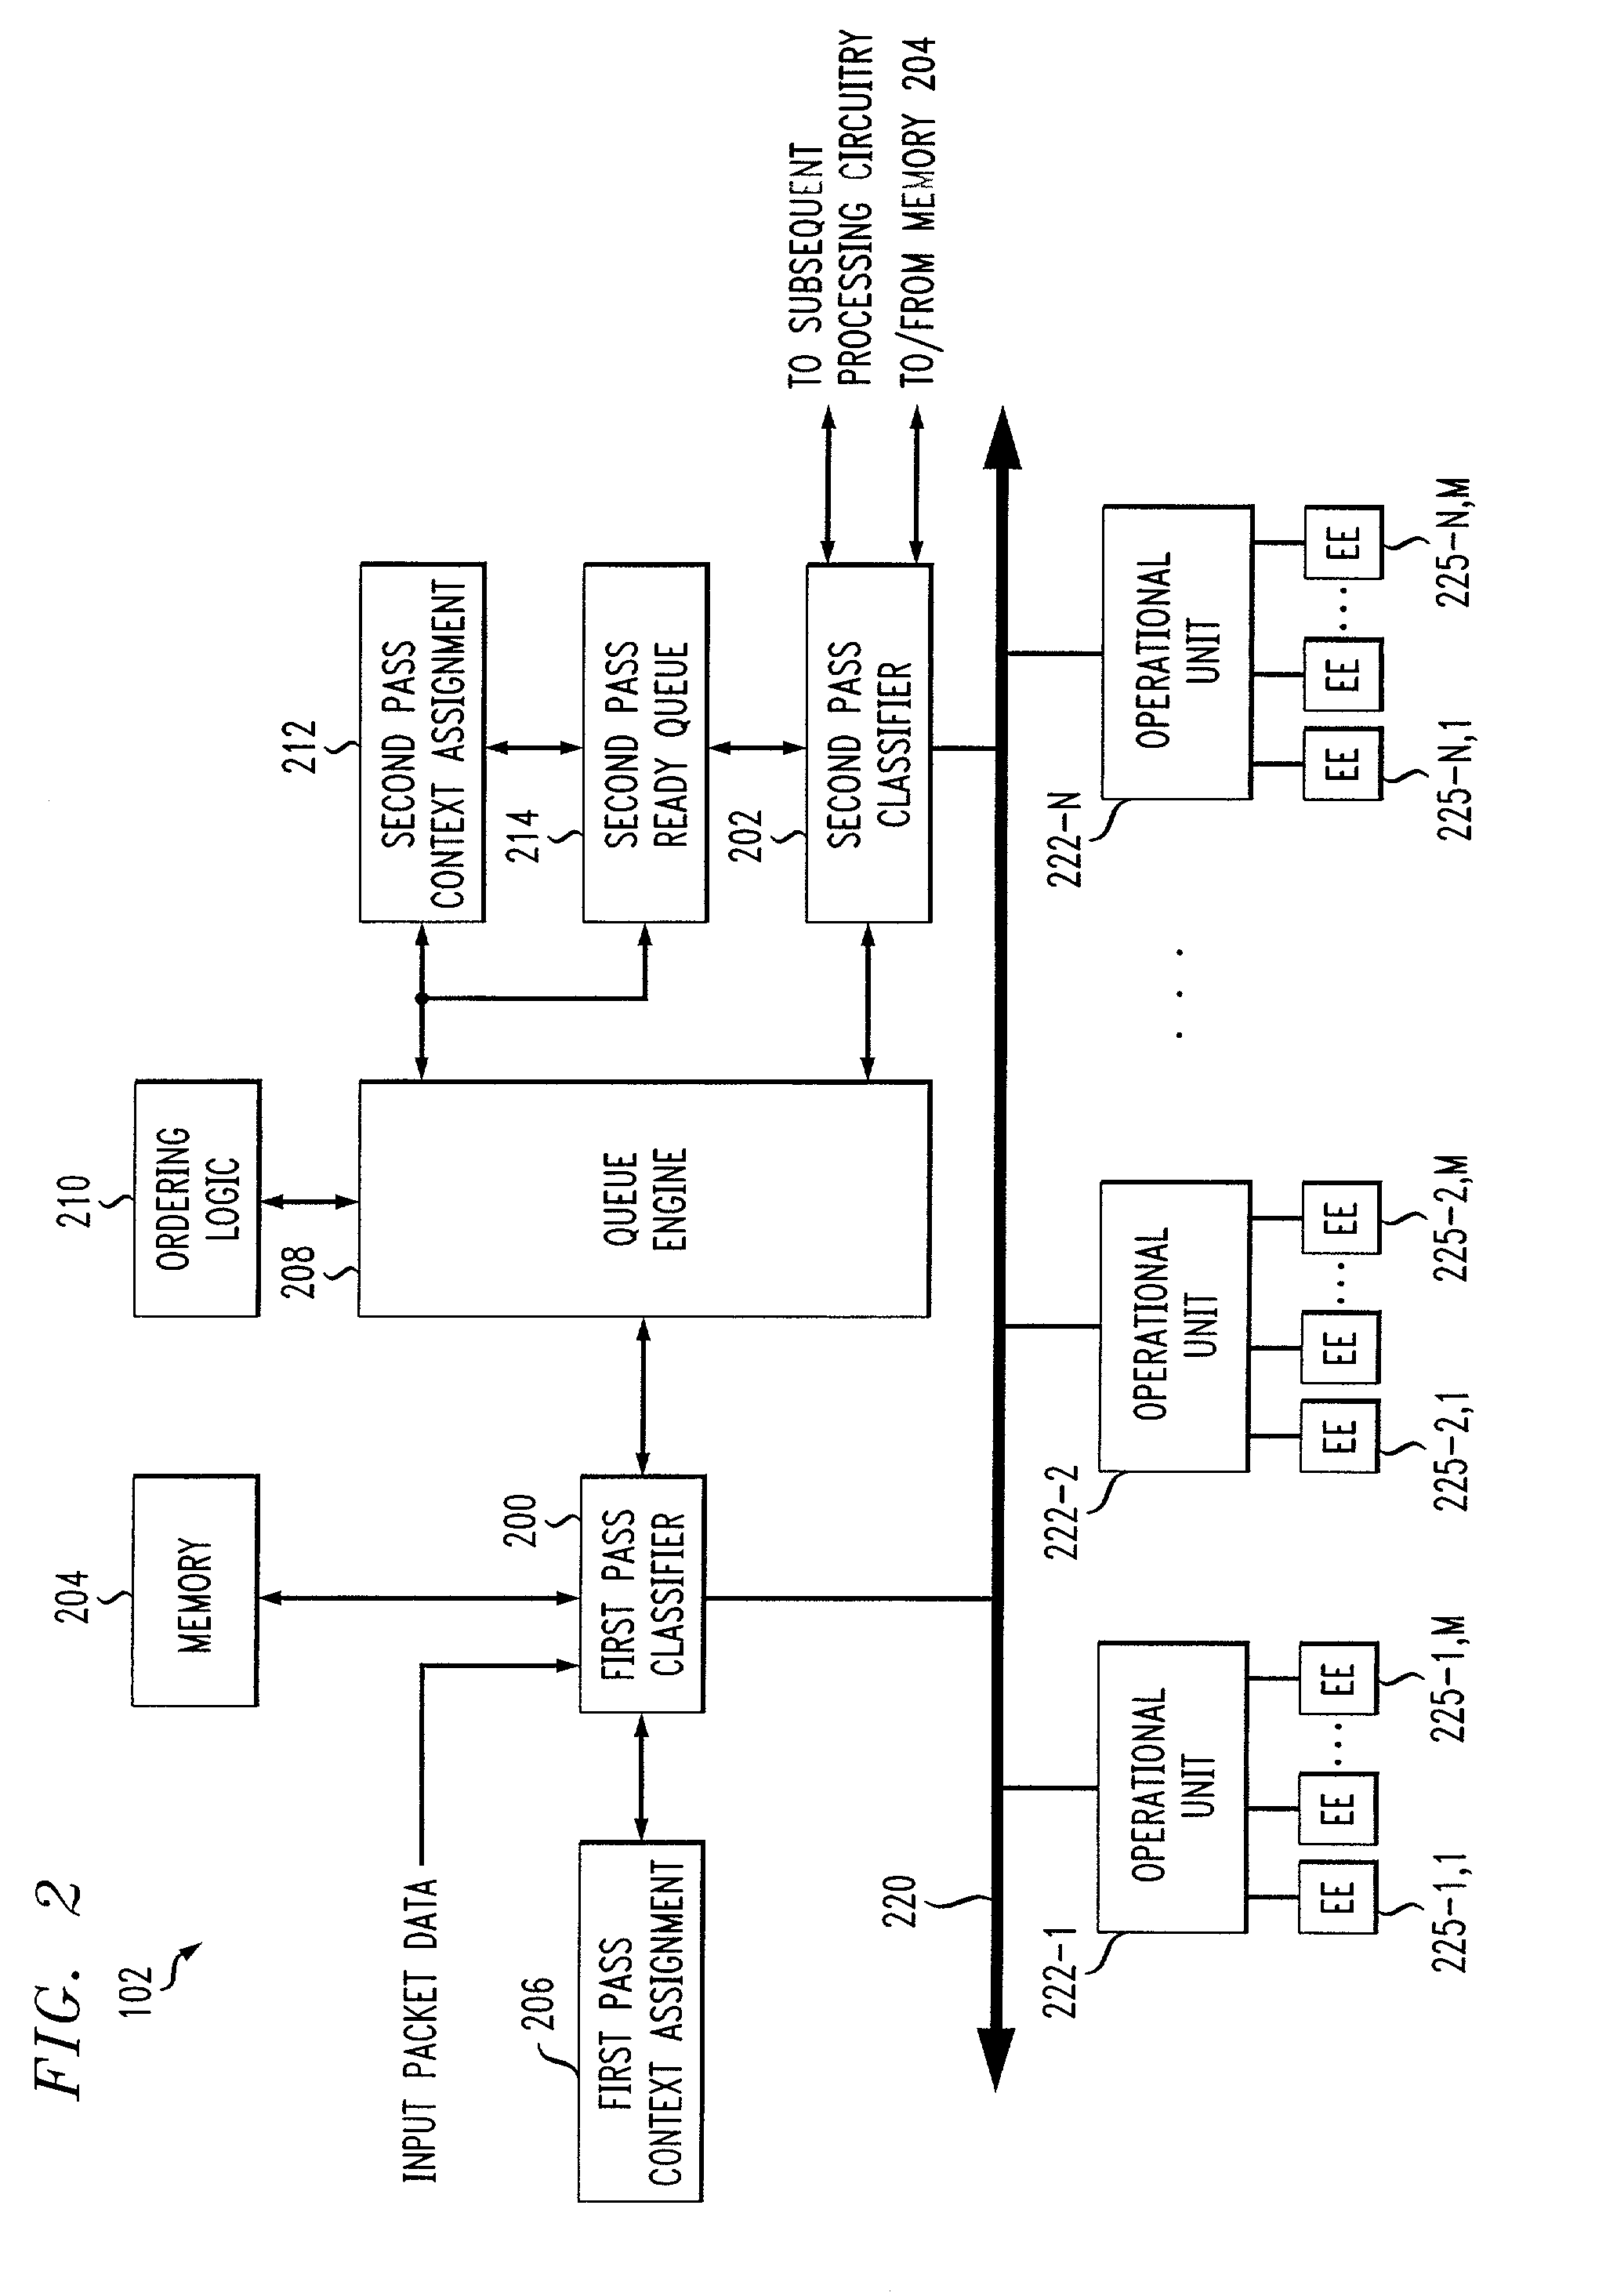 Processor with packet processing order maintenance based on packet flow identifiers